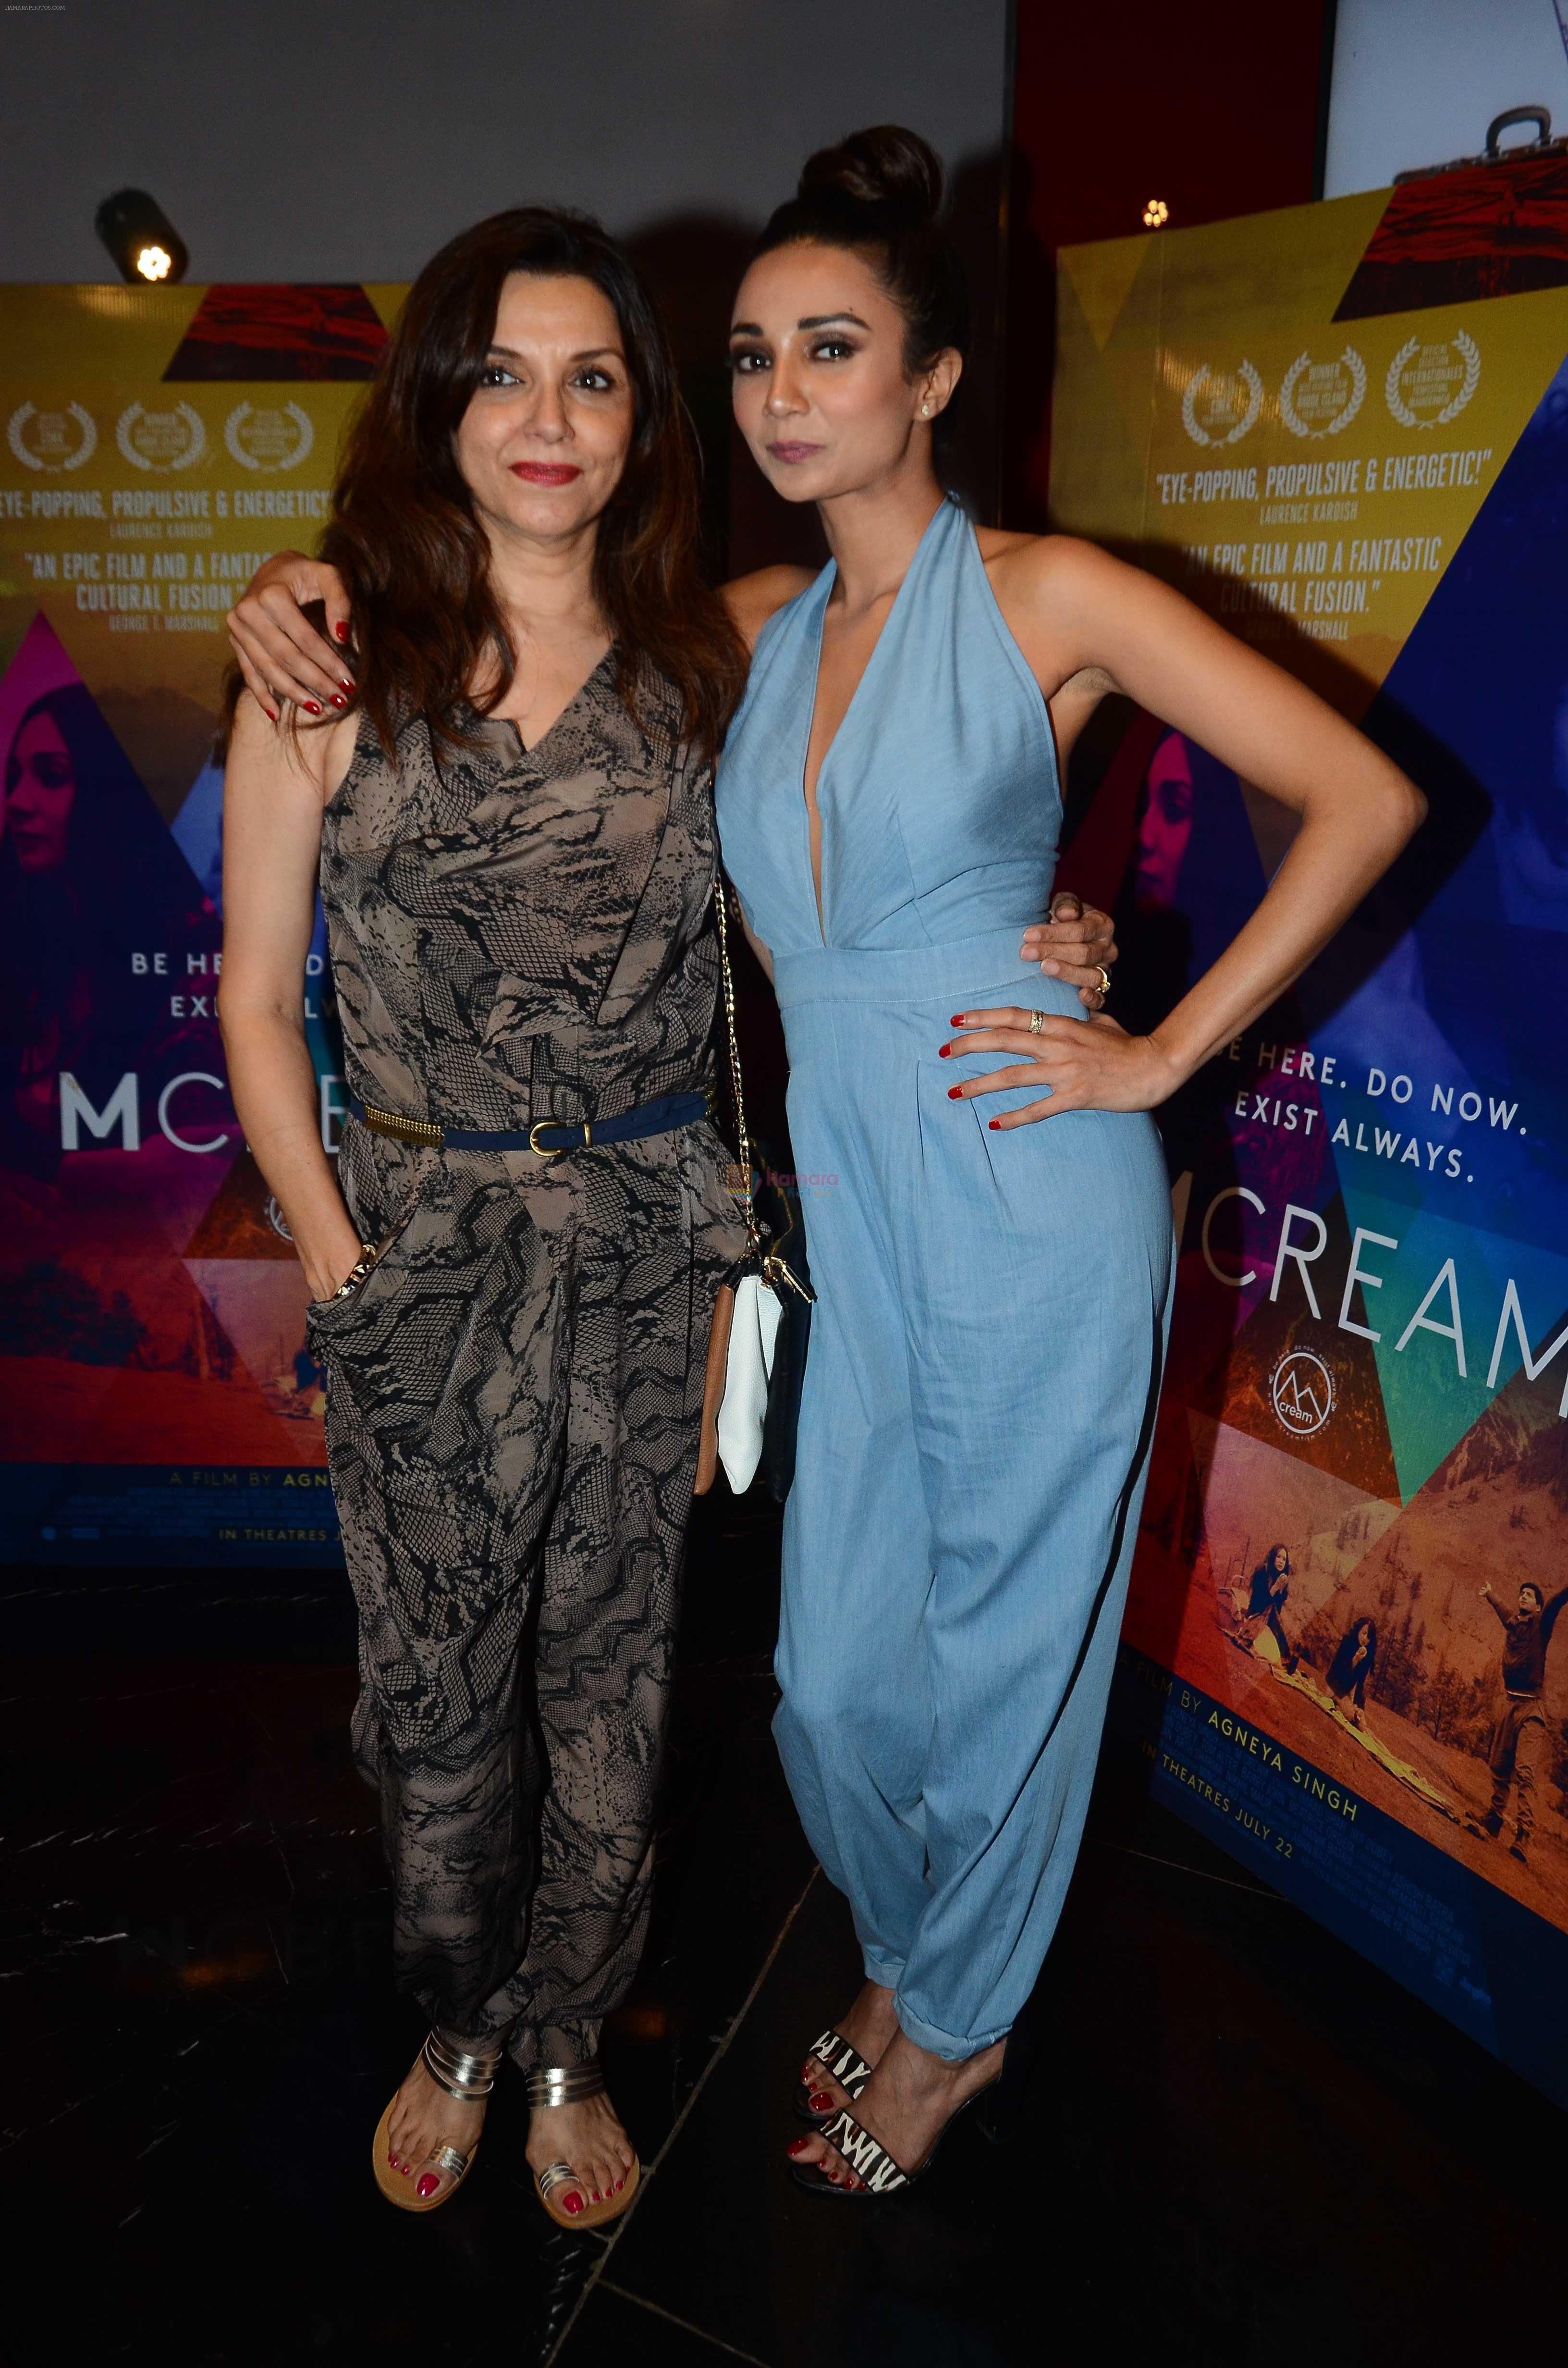 Lillete Dubey, Ira Dubey during the special screening of film M Cream on 22 July 2016